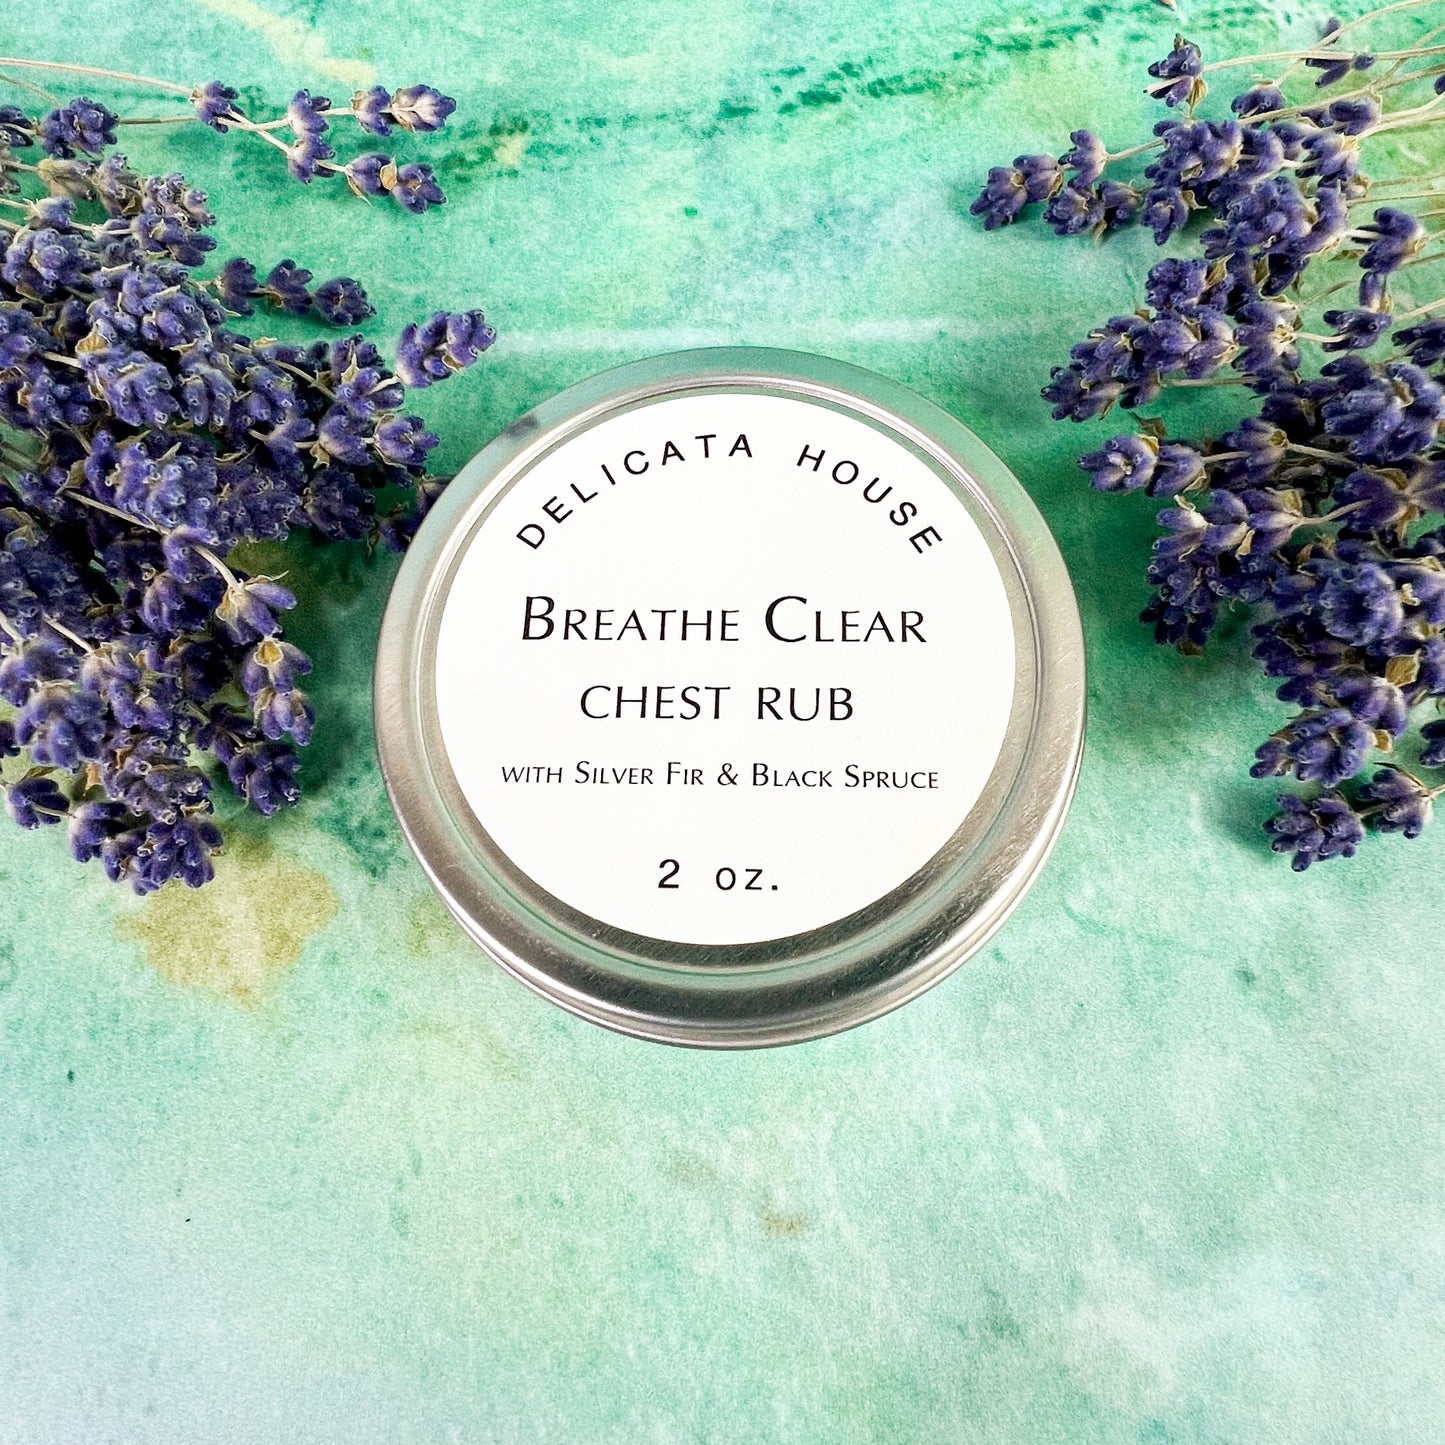 Breathe Clear Chest Rub - Aromatic Chest Rub - Chest Balm with Silver Fir and Black Spruce - Natural Aromatic Decongestant